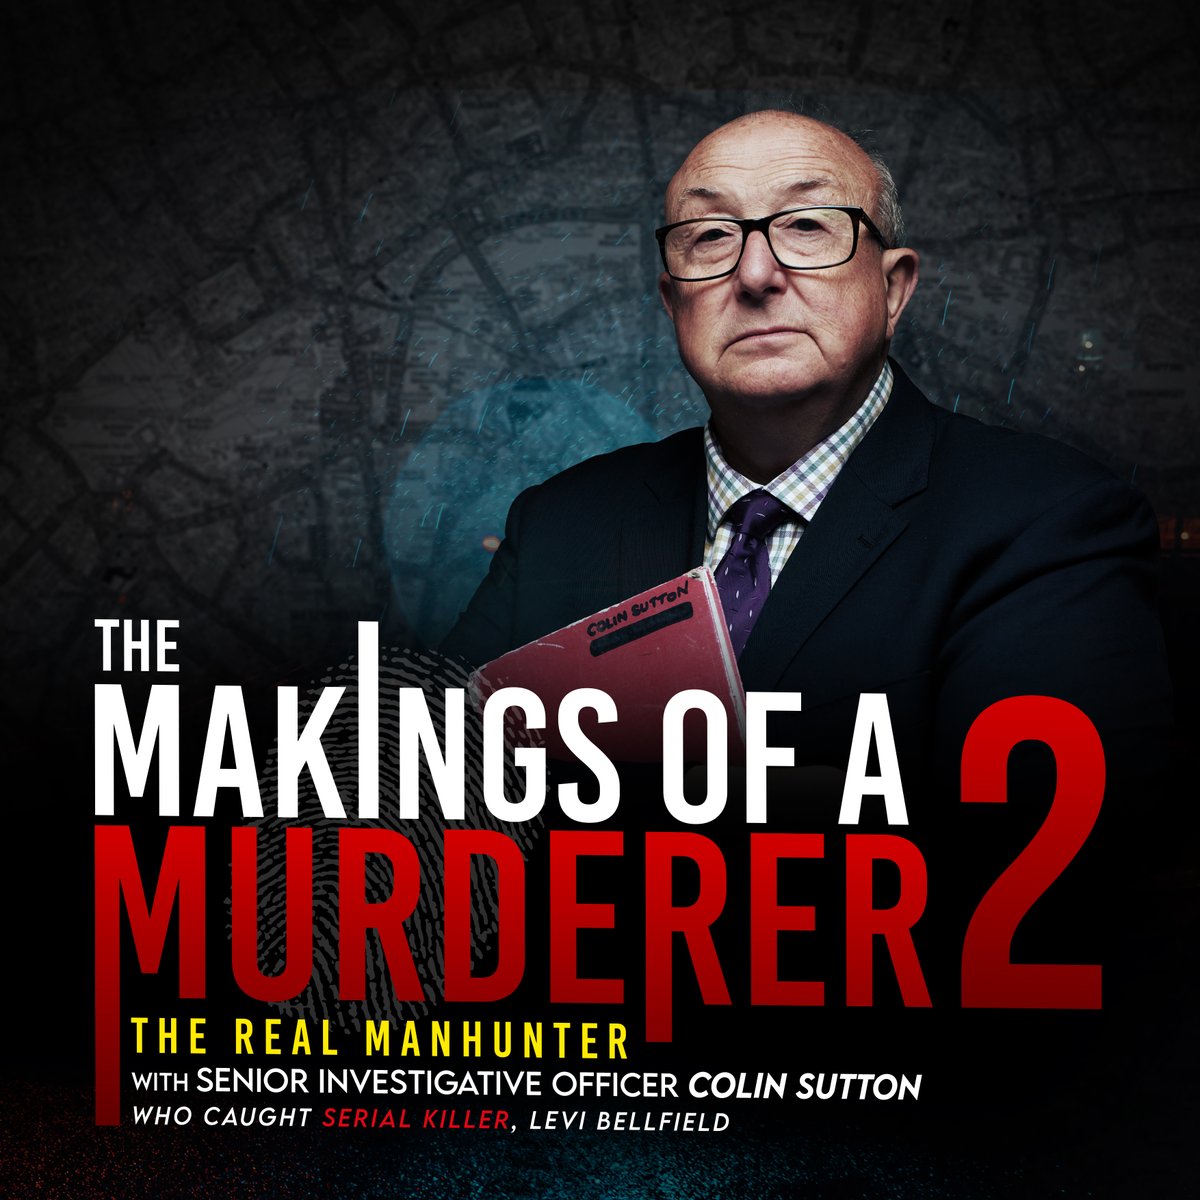 True crime comes to the Duchess Theatre 🕵️‍♂️ Following sell-out shows nationwide, Senior Investigating Officer Colin Sutton stars in The Makings of a Murderer 2 for one night only this November. 🎟️ Get your tickets now bit.ly/3QCxOTS